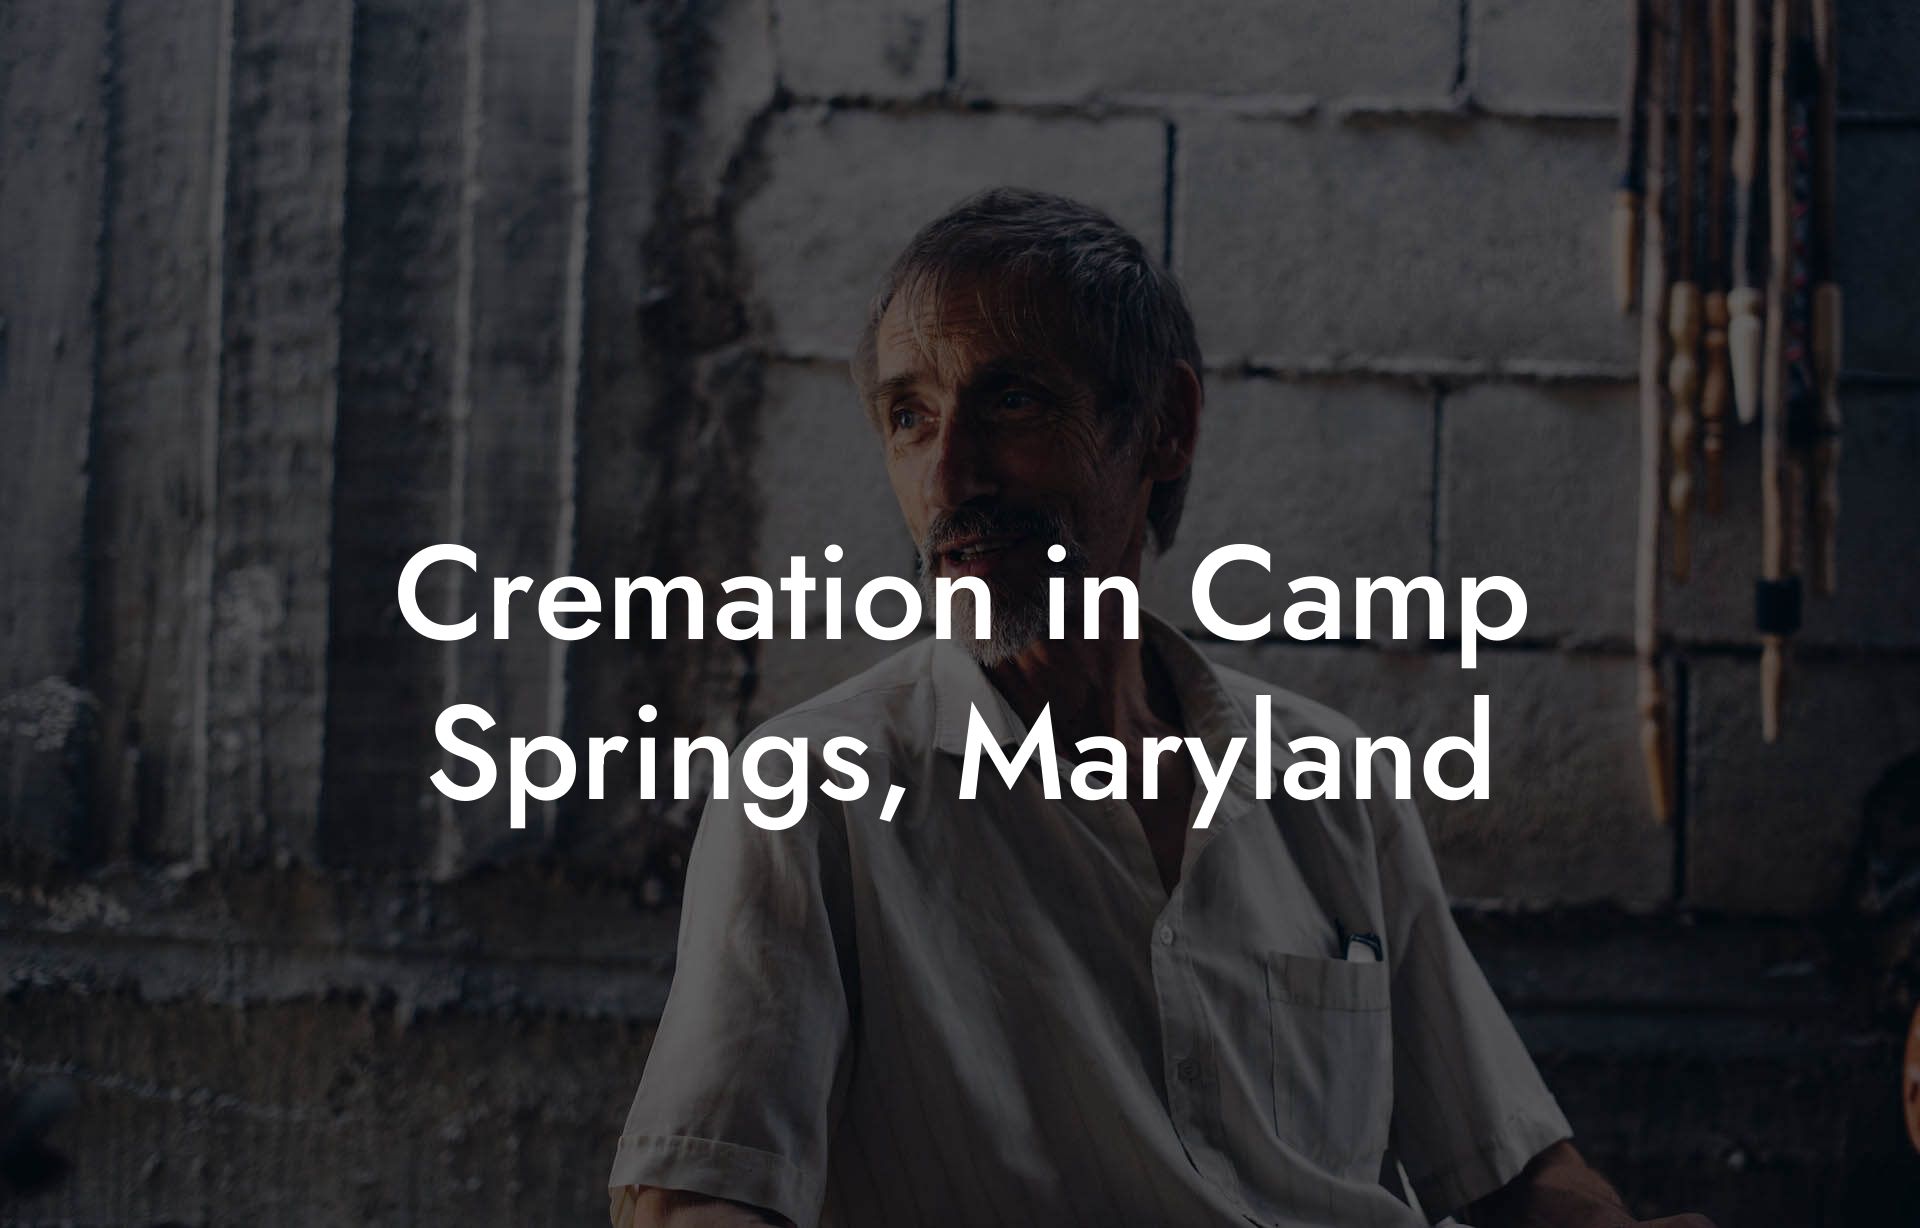 Cremation in Camp Springs, Maryland